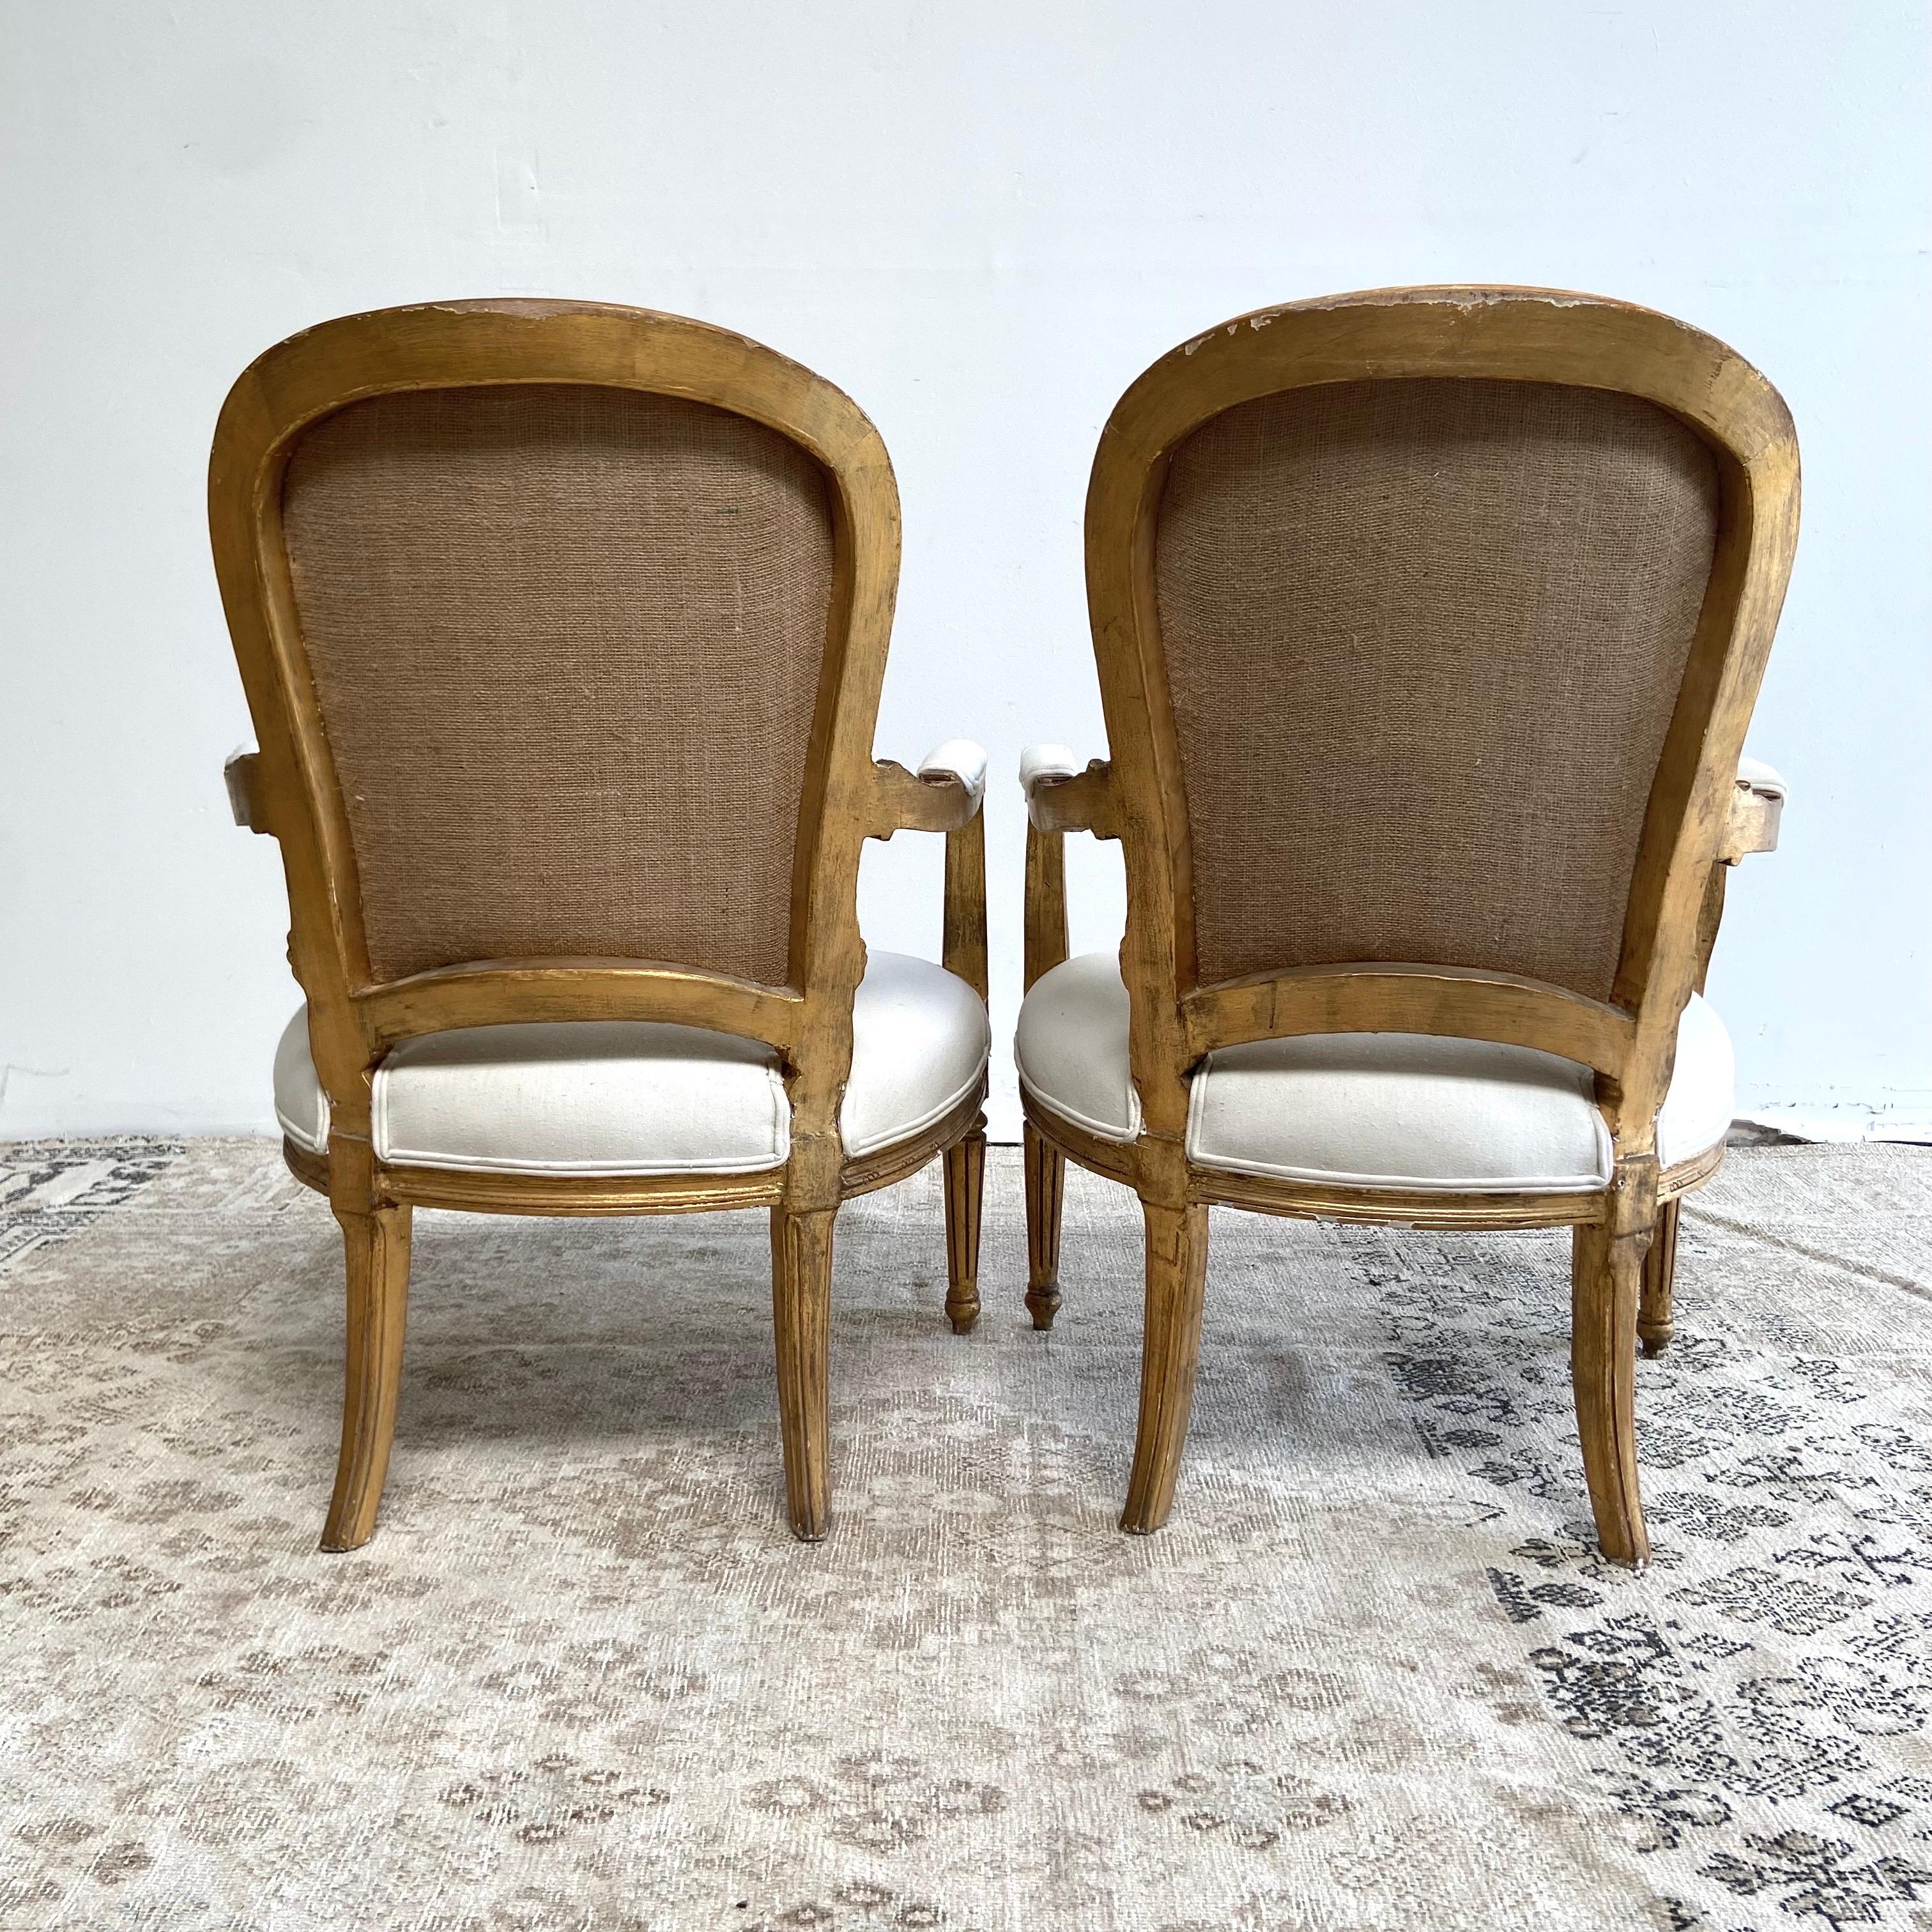 Vintage French Style Louis XVI Open Arm Chairs with Linen Upholstery For Sale 1